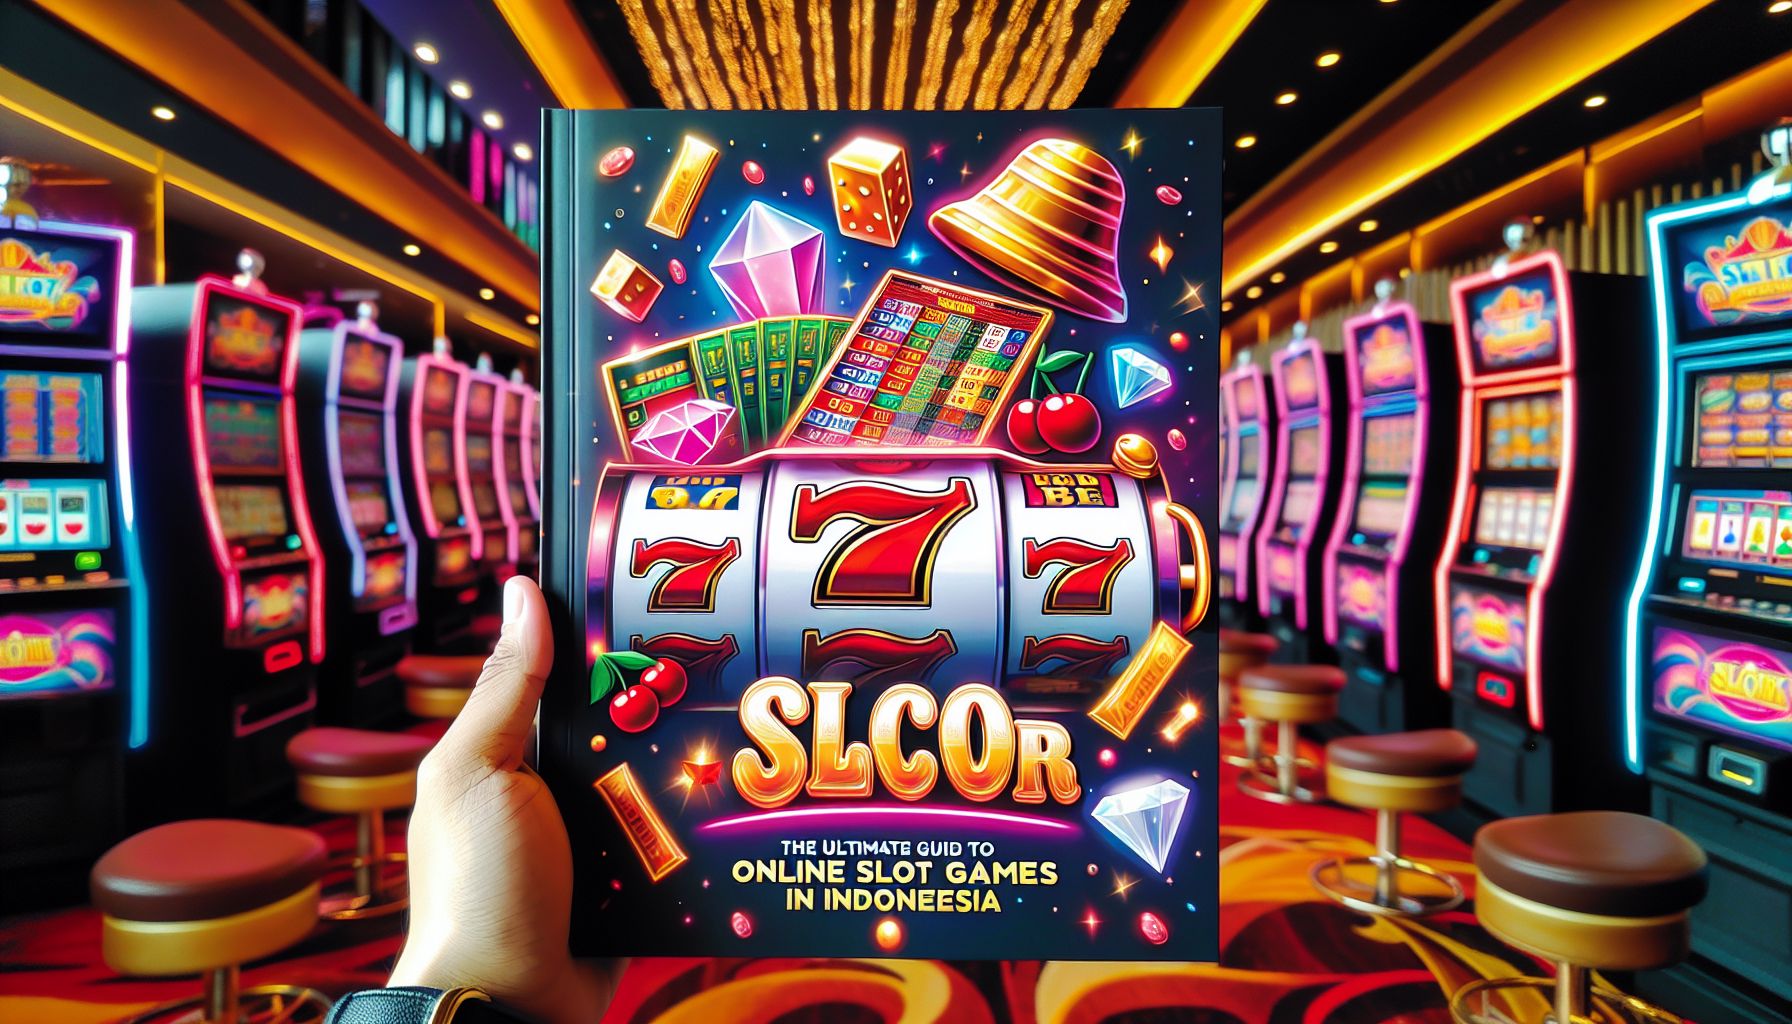 **Slot Gacor: The Ultimate Guide to Online Slot Games in Indonesia**